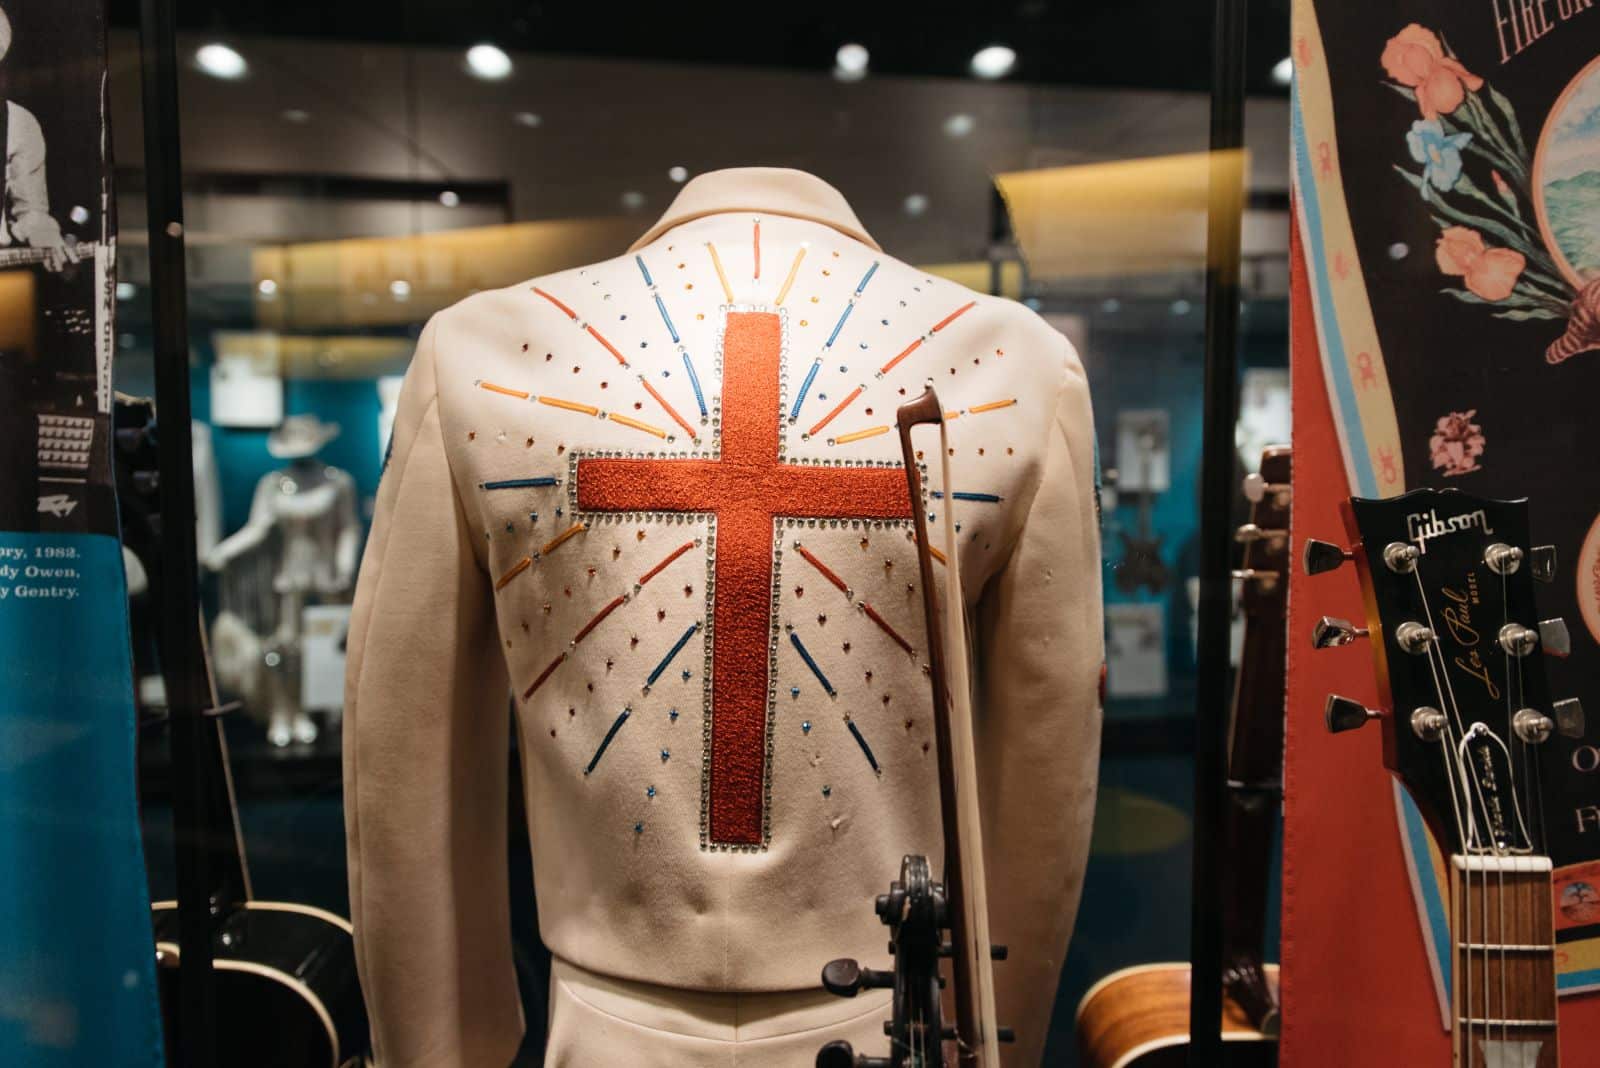 <p class="wp-caption-text">Image Credit: Shutterstock / Agave Photo Studio</p>  <p>Immerse yourself in the history of country music at the Country Music Hall of Fame. From interactive exhibits to priceless memorabilia, this museum offers a comprehensive look at the genre’s evolution and impact on American culture.</p>